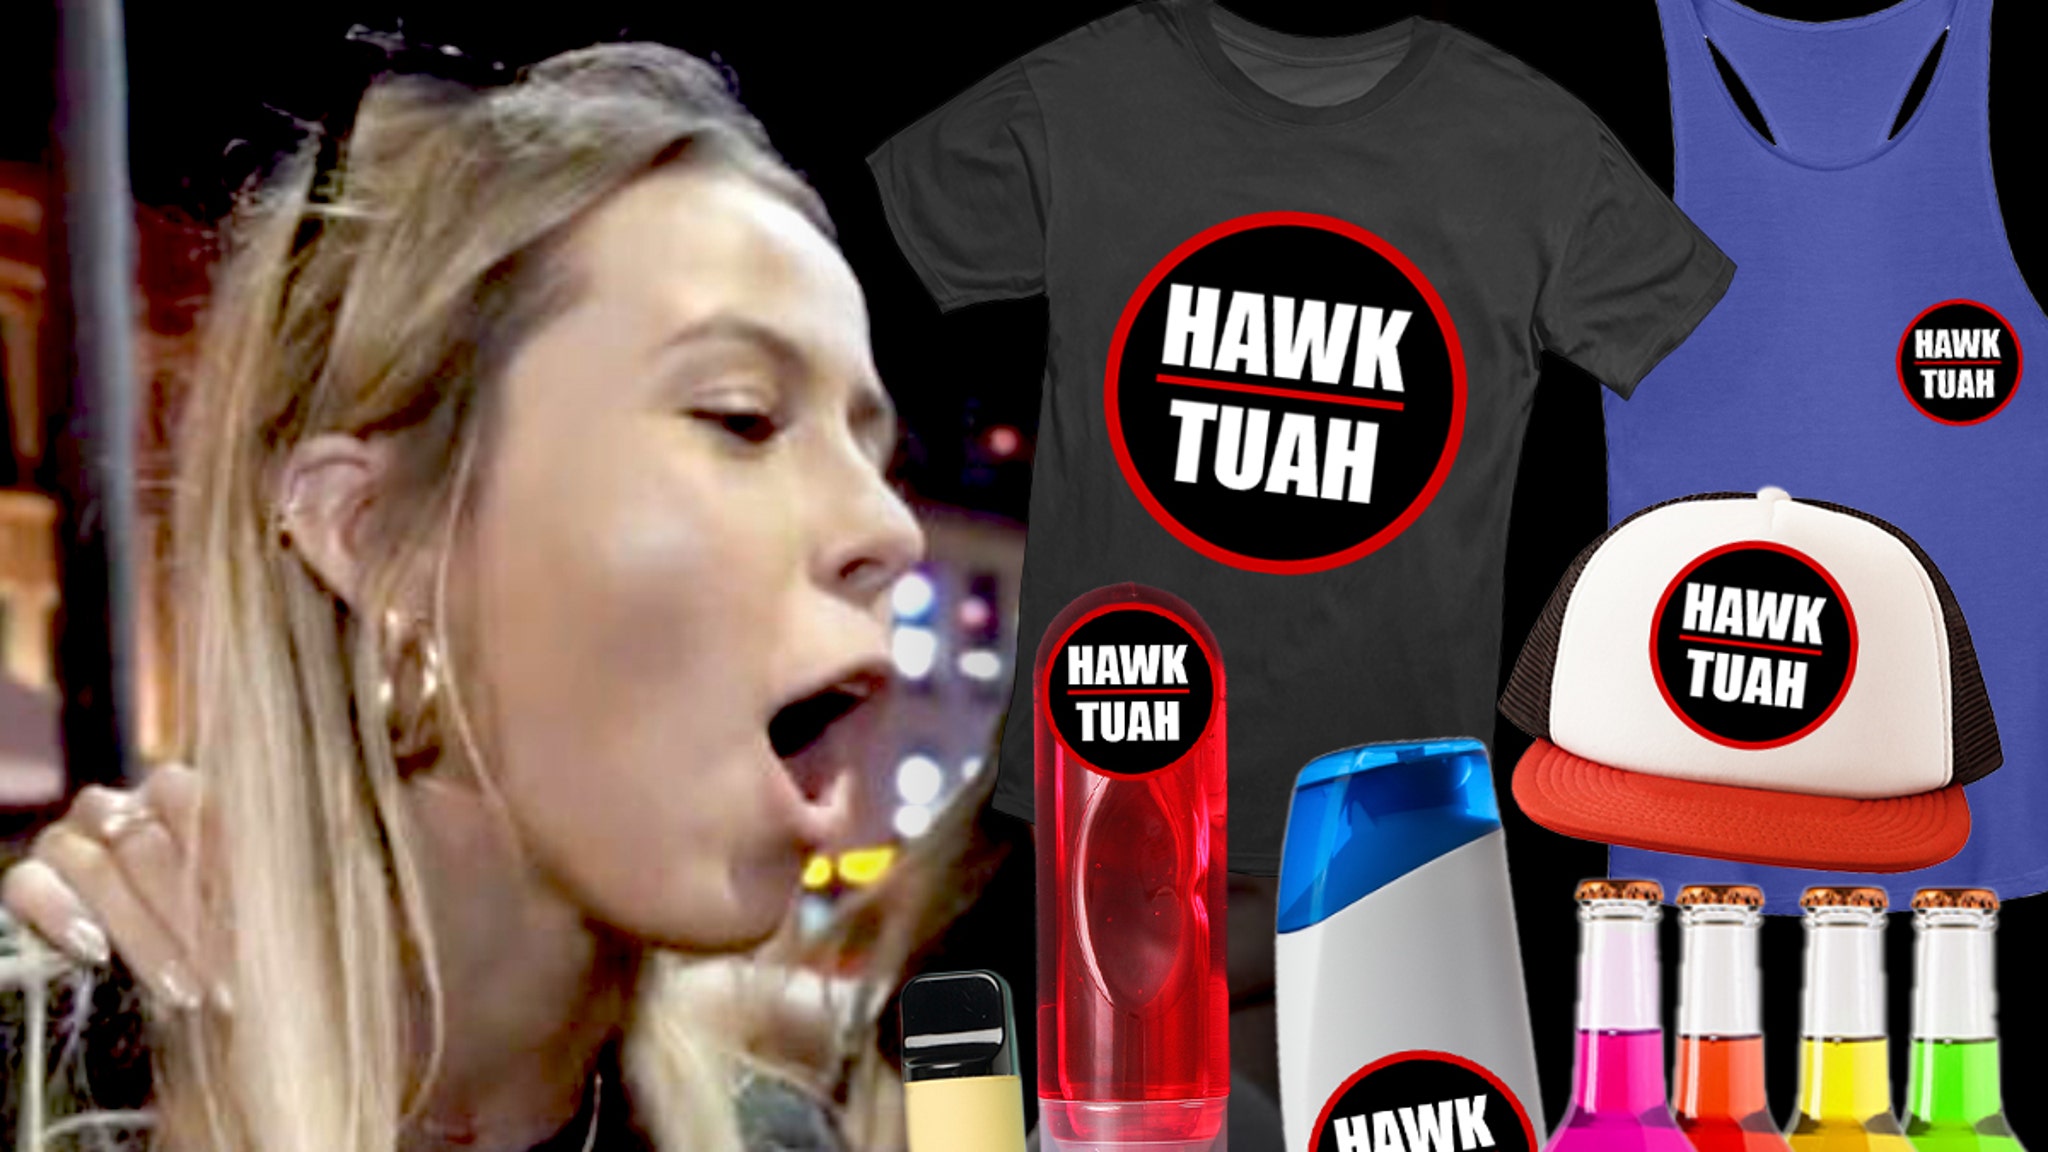 'Hawk Tuah' trademarks are piling up for lubricants, sauces, drinks and more